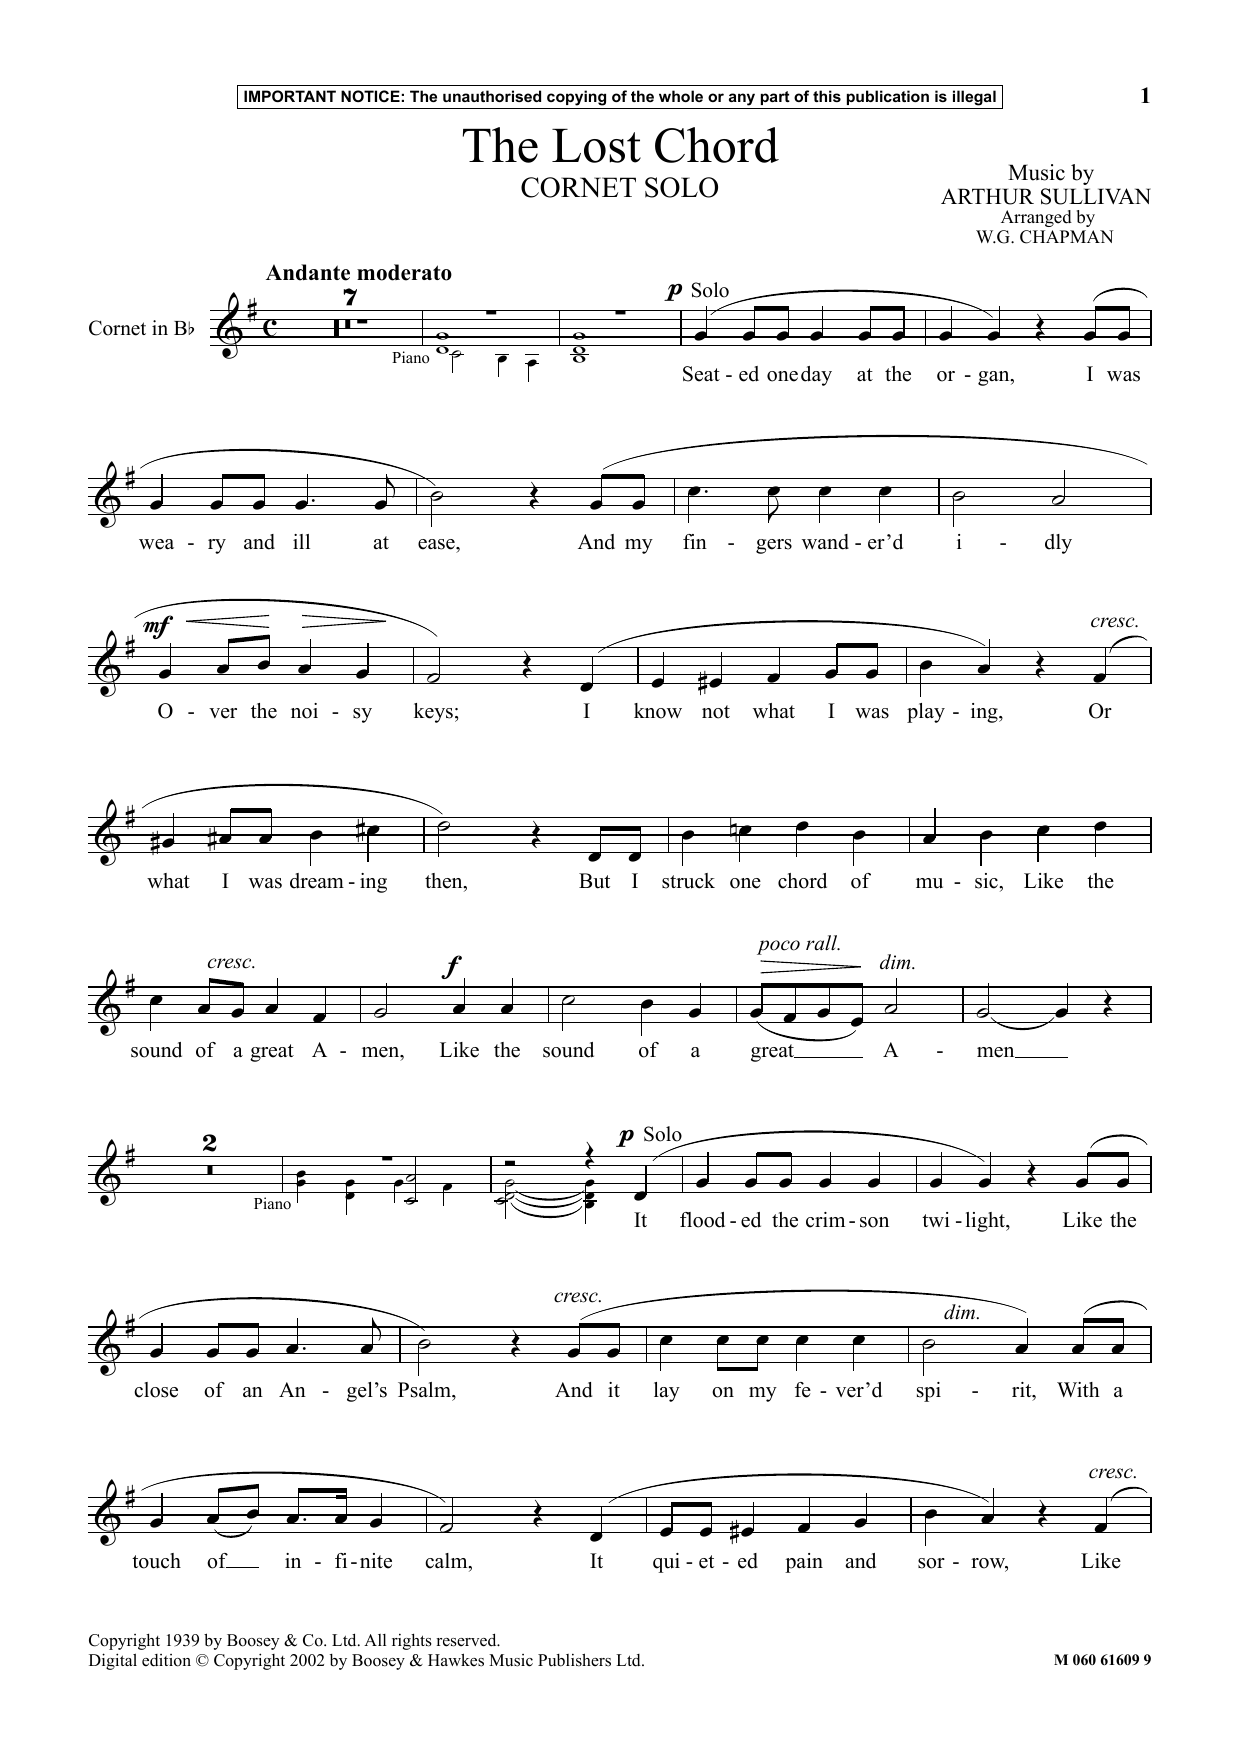 Download W.G. Chapman The Lost Chord Sheet Music